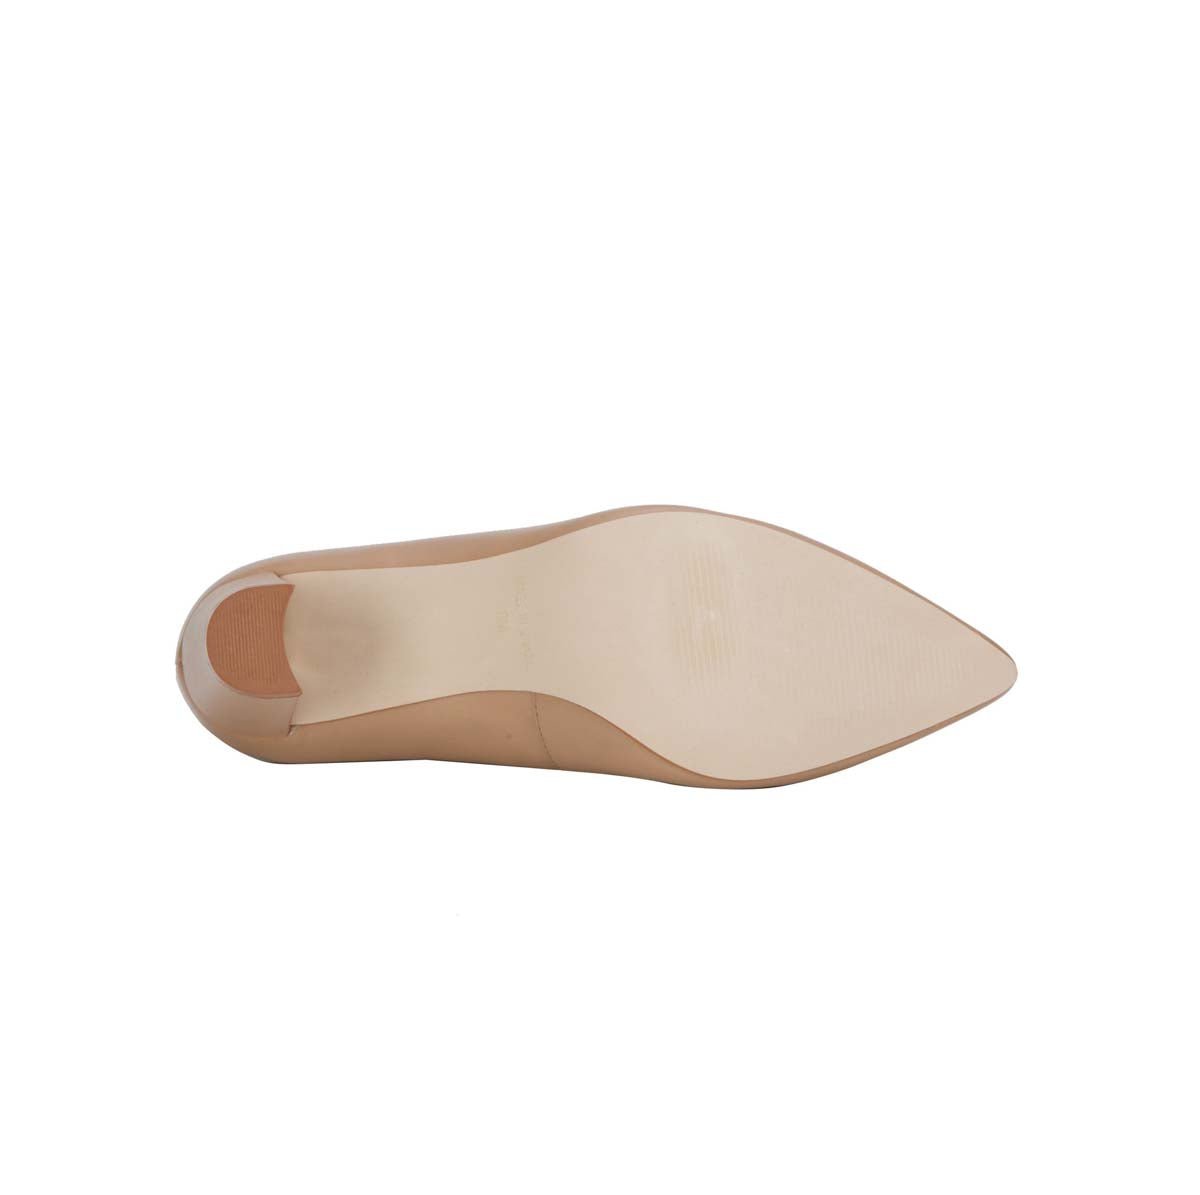 WALKING CRADLES WC SAMANTHA WOMEN PUMP SHOE IN NUDE CASHMERE LEATHER - TLW Shoes